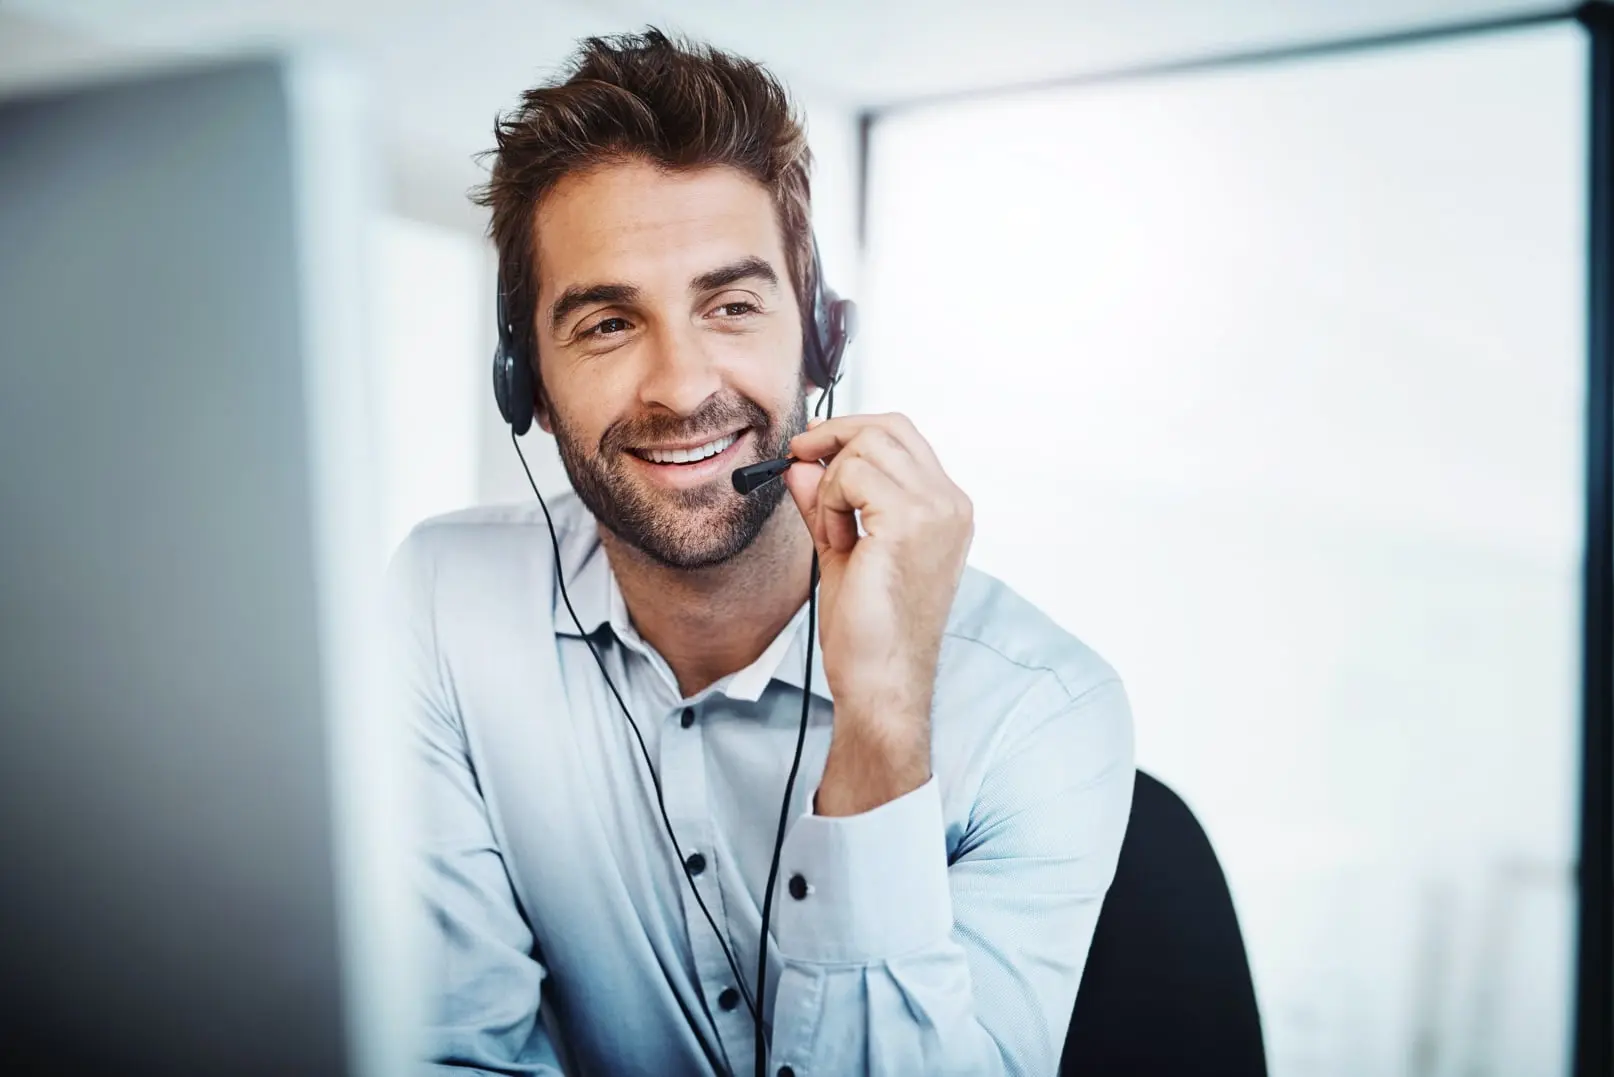 A customer support representative eagerly helping a customer via a call on his headset.